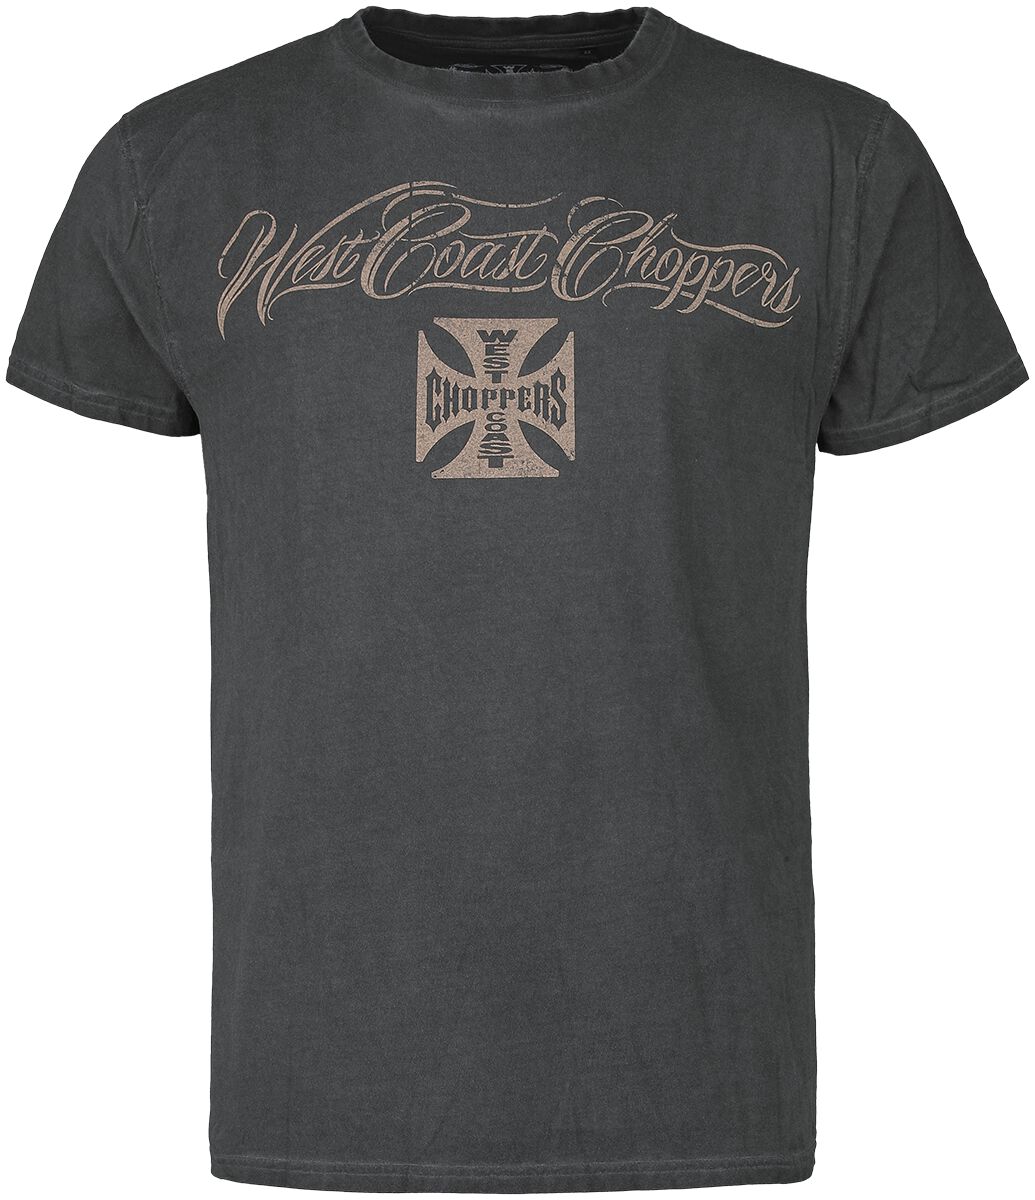 West Coast Choppers Eagle Crest T-Shirt anthrazit in 4XL